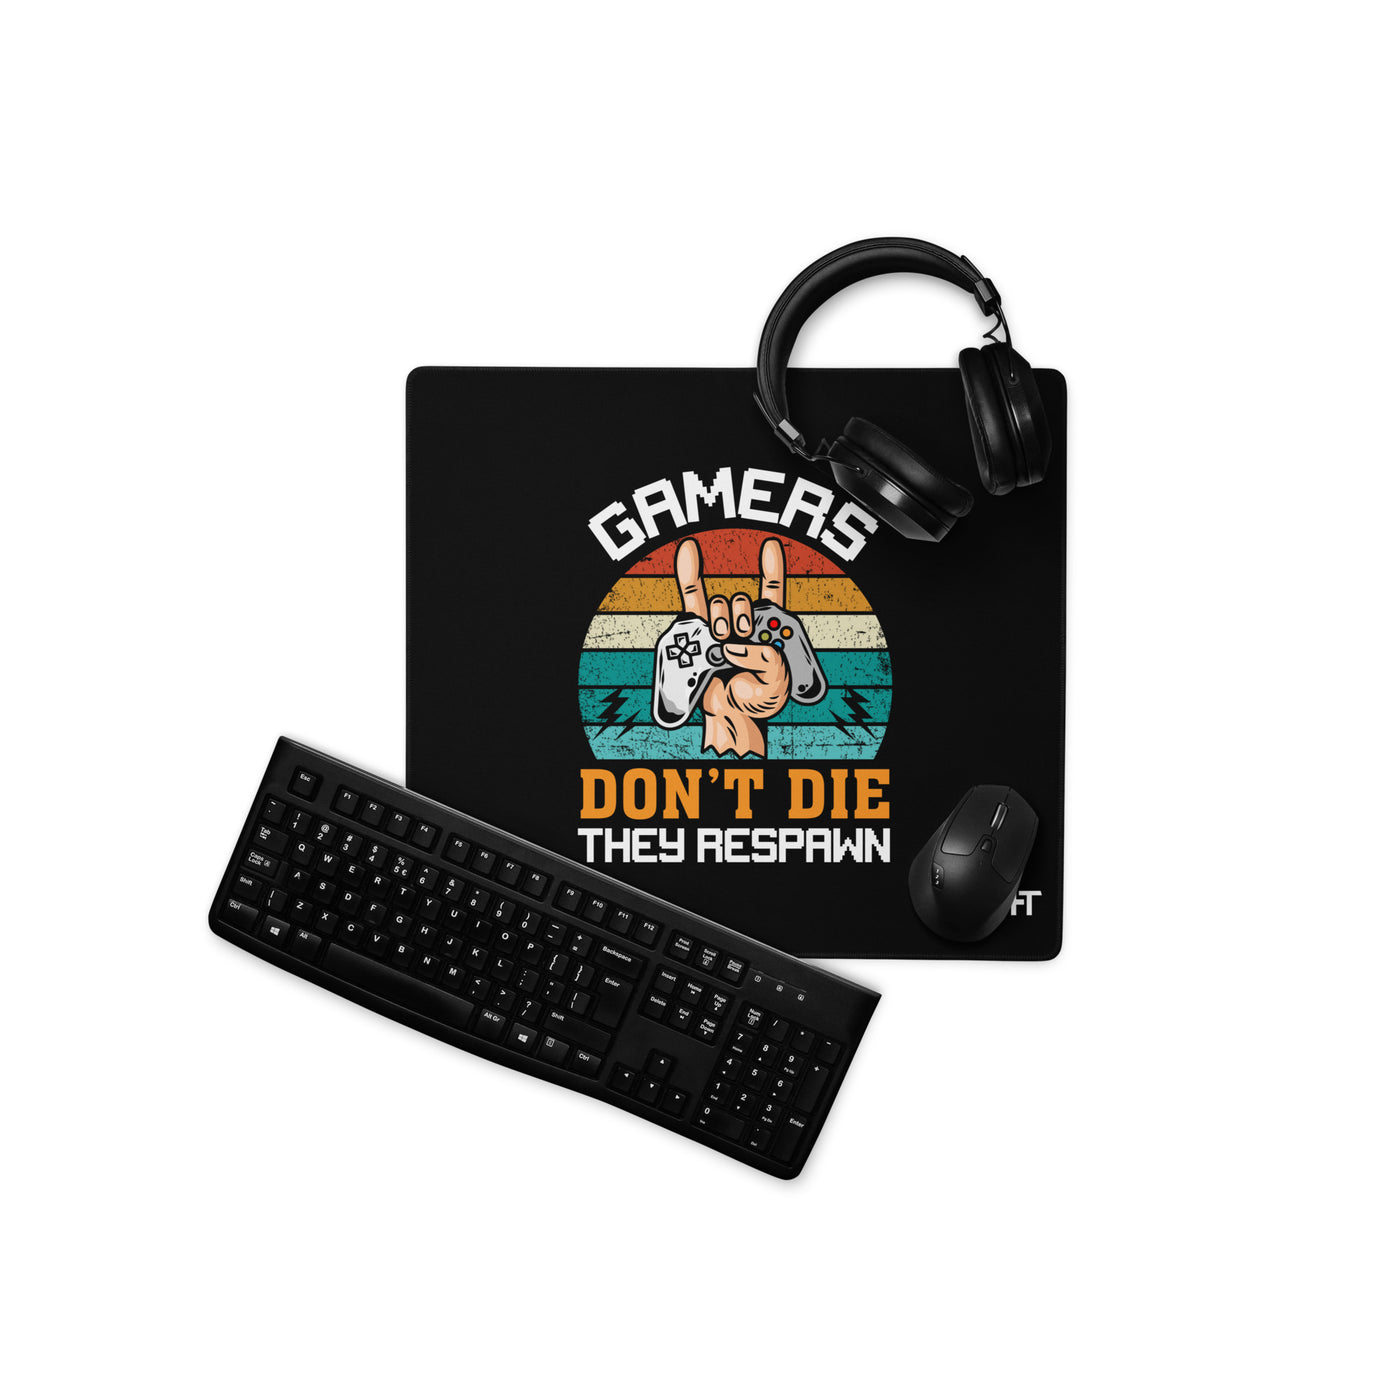 Gamers don't Die, they Respawn - Gaming mouse pad